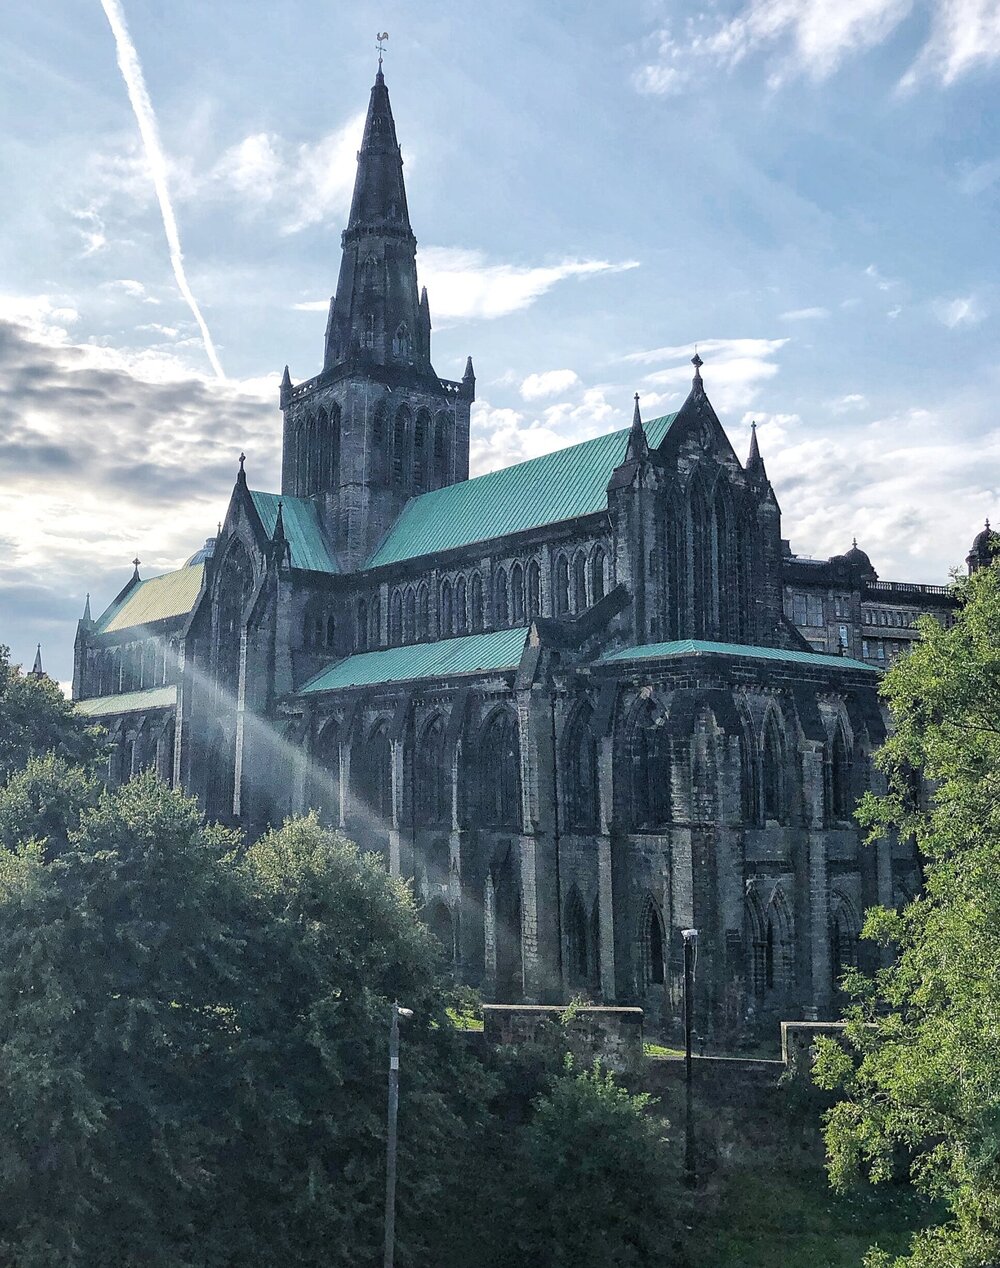 Glasgow Cathedral (Image: Creative Commons)